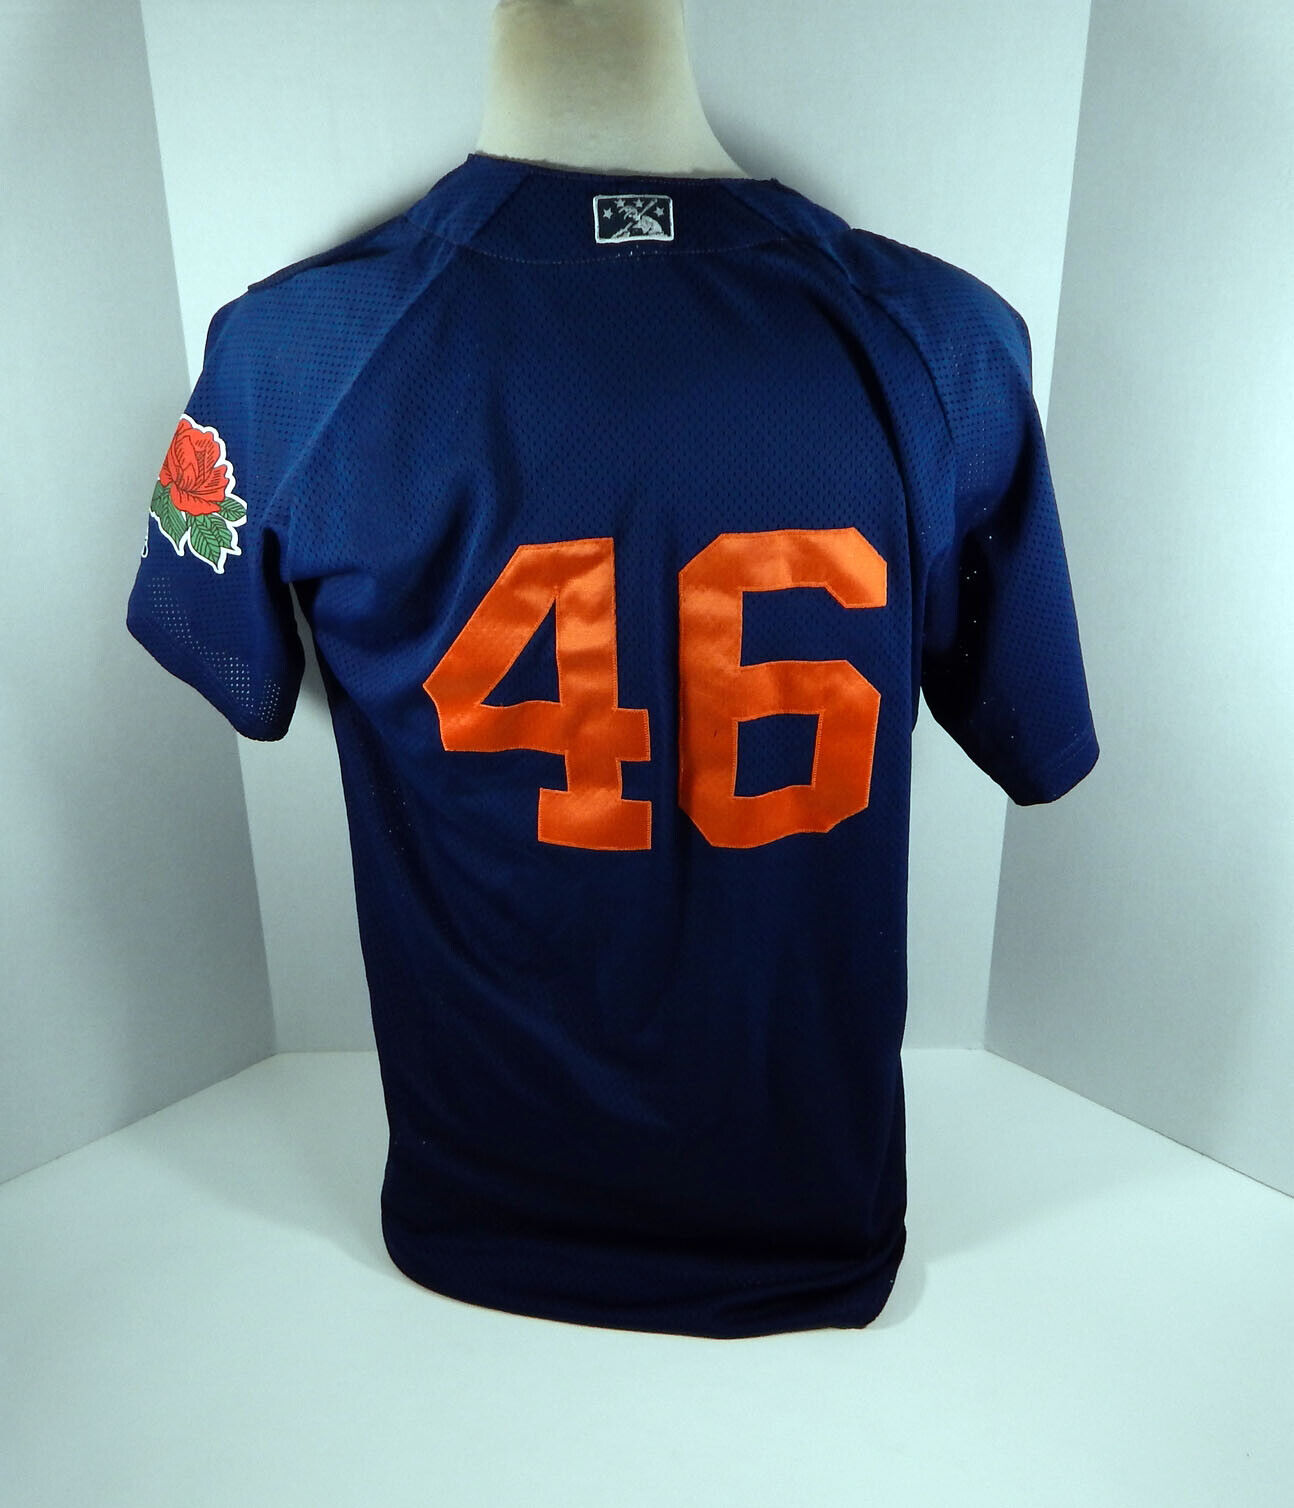 2019 Connecticut Tigers Xavier Javier #46 Game Used Navy Jersey Alt DP02070